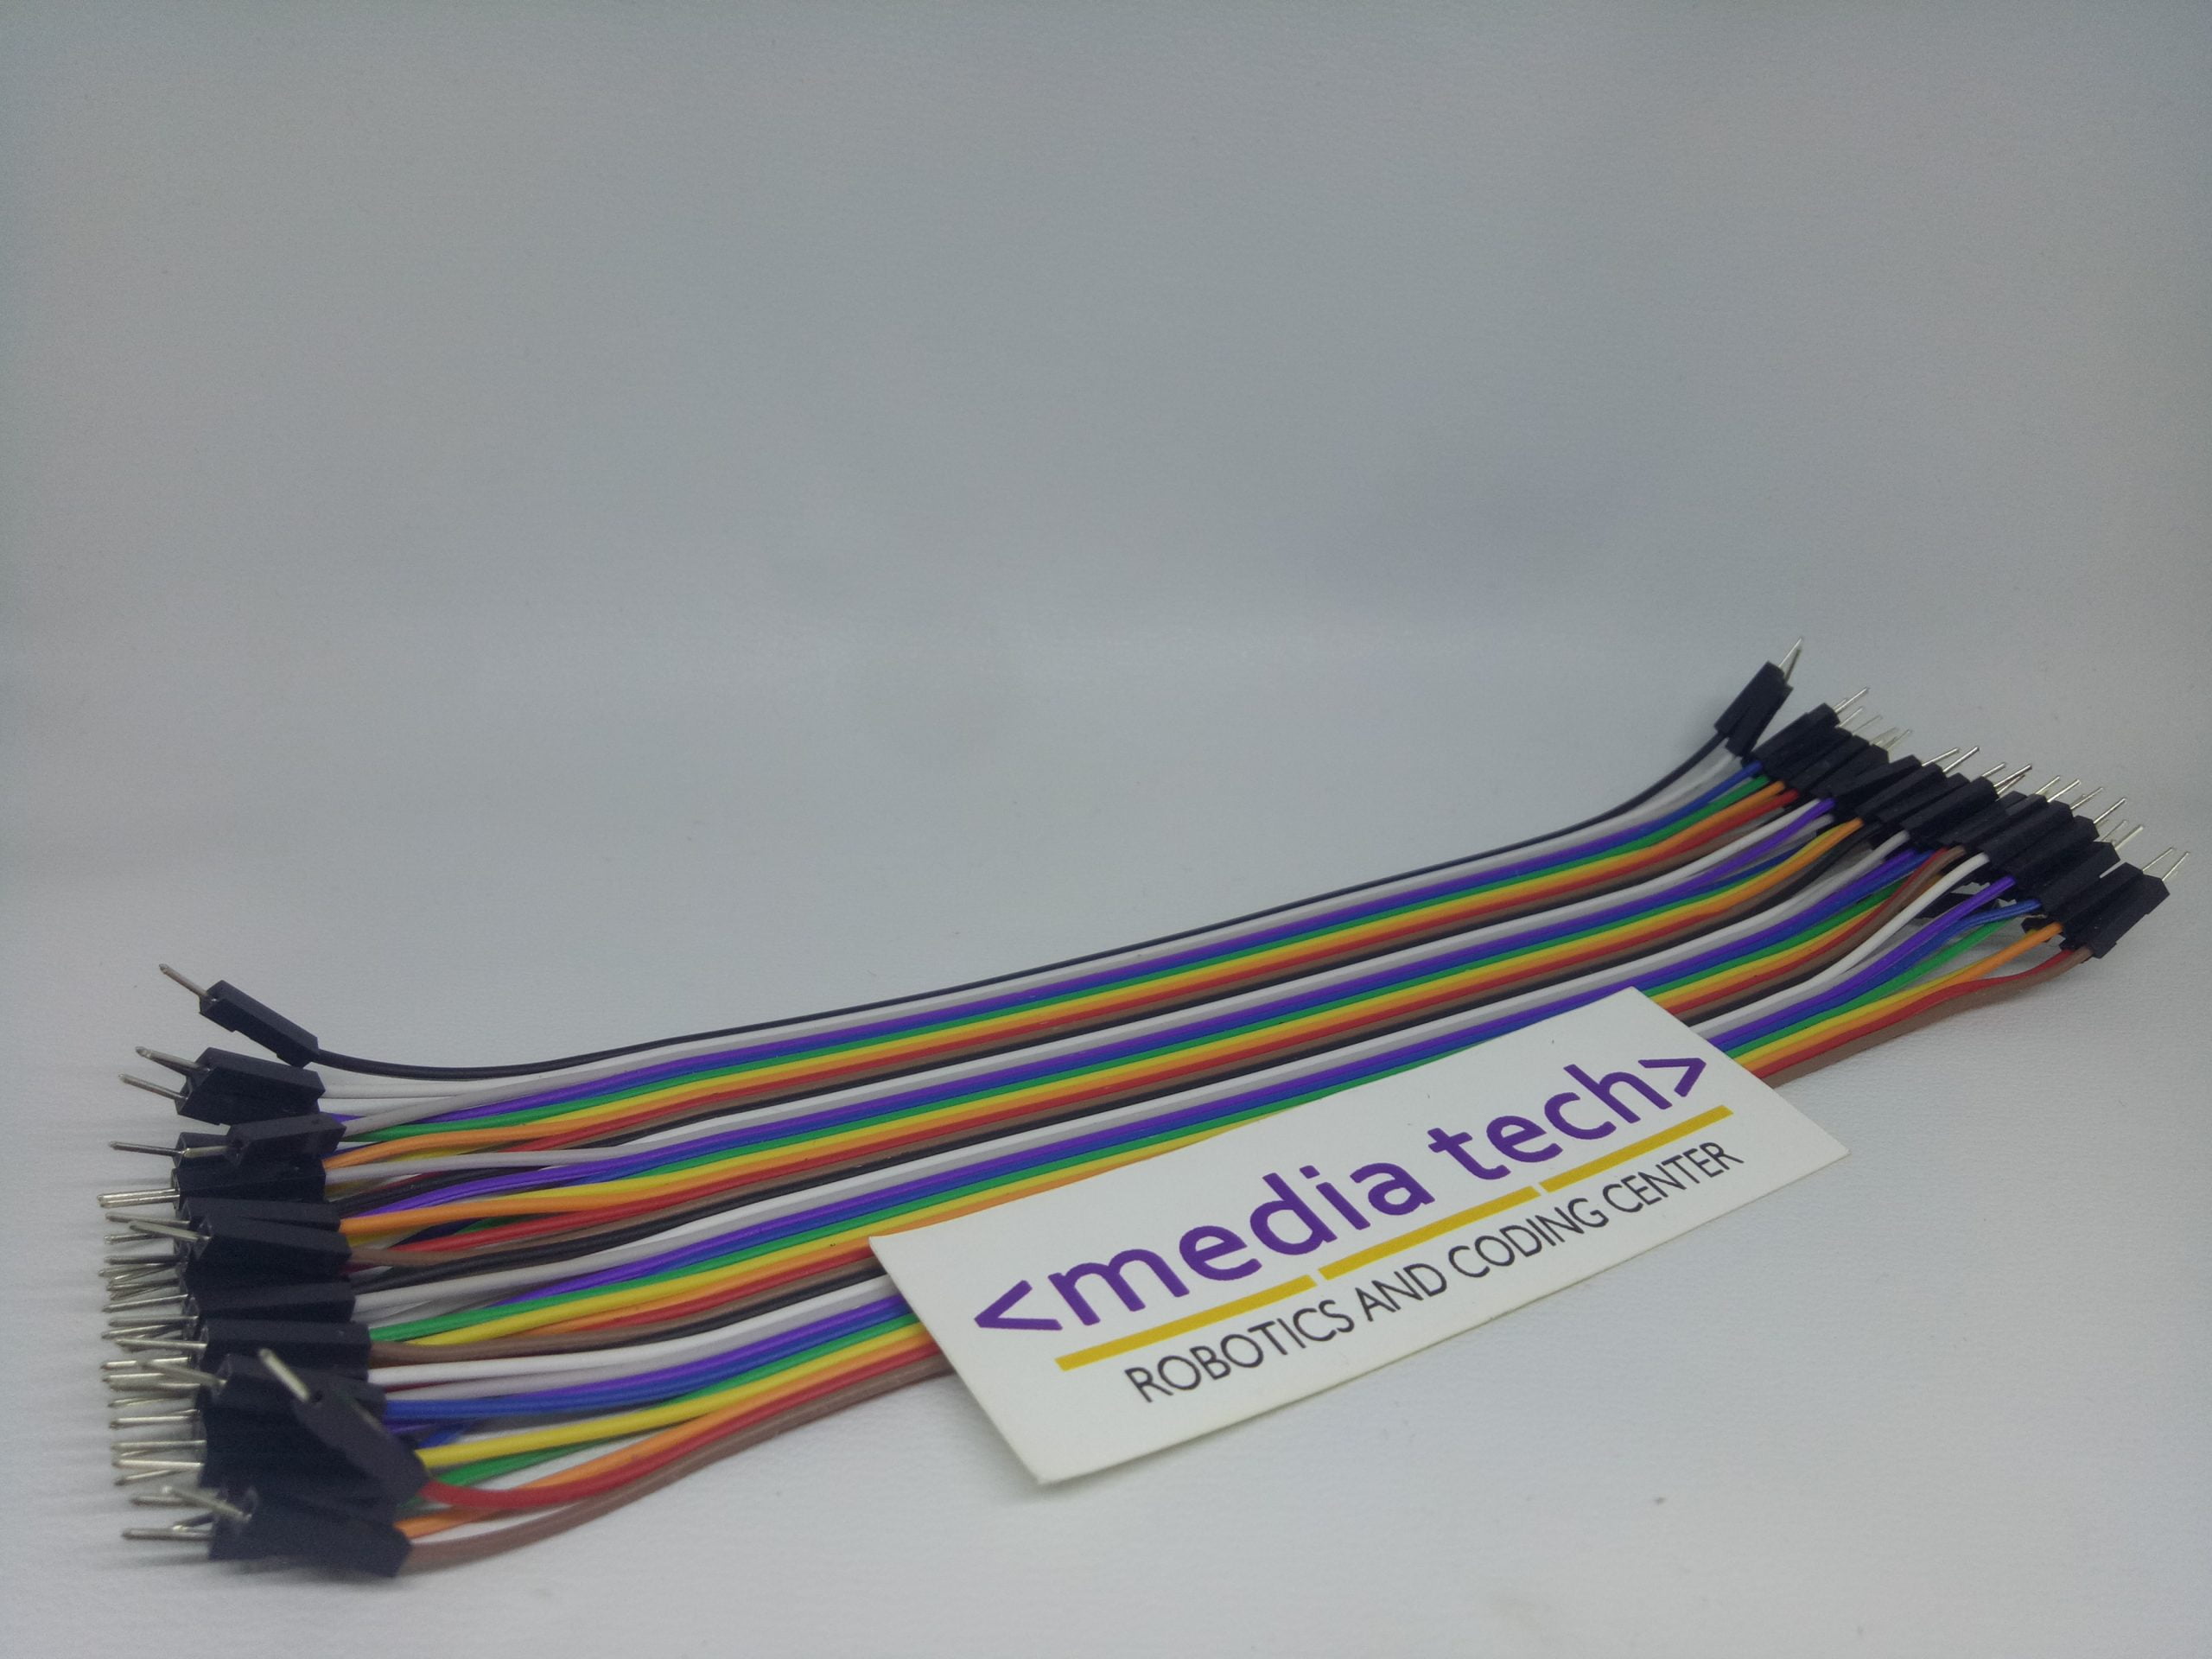 Jumper Cable Kabel 20cm Male to Male Dupont or Breadboard - Koding Akademi